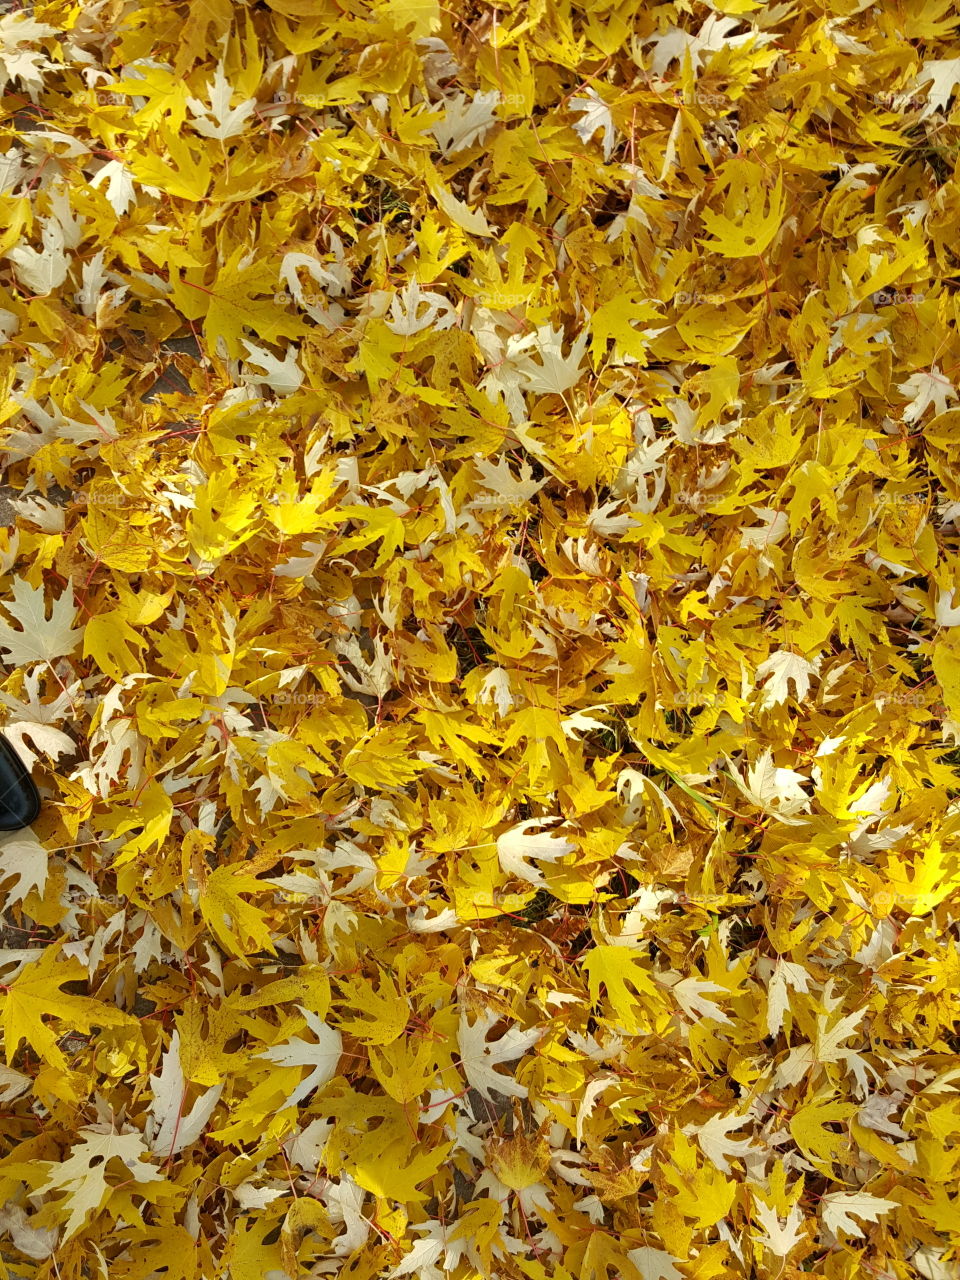 Yellow leaves blanket the ground in Autumn